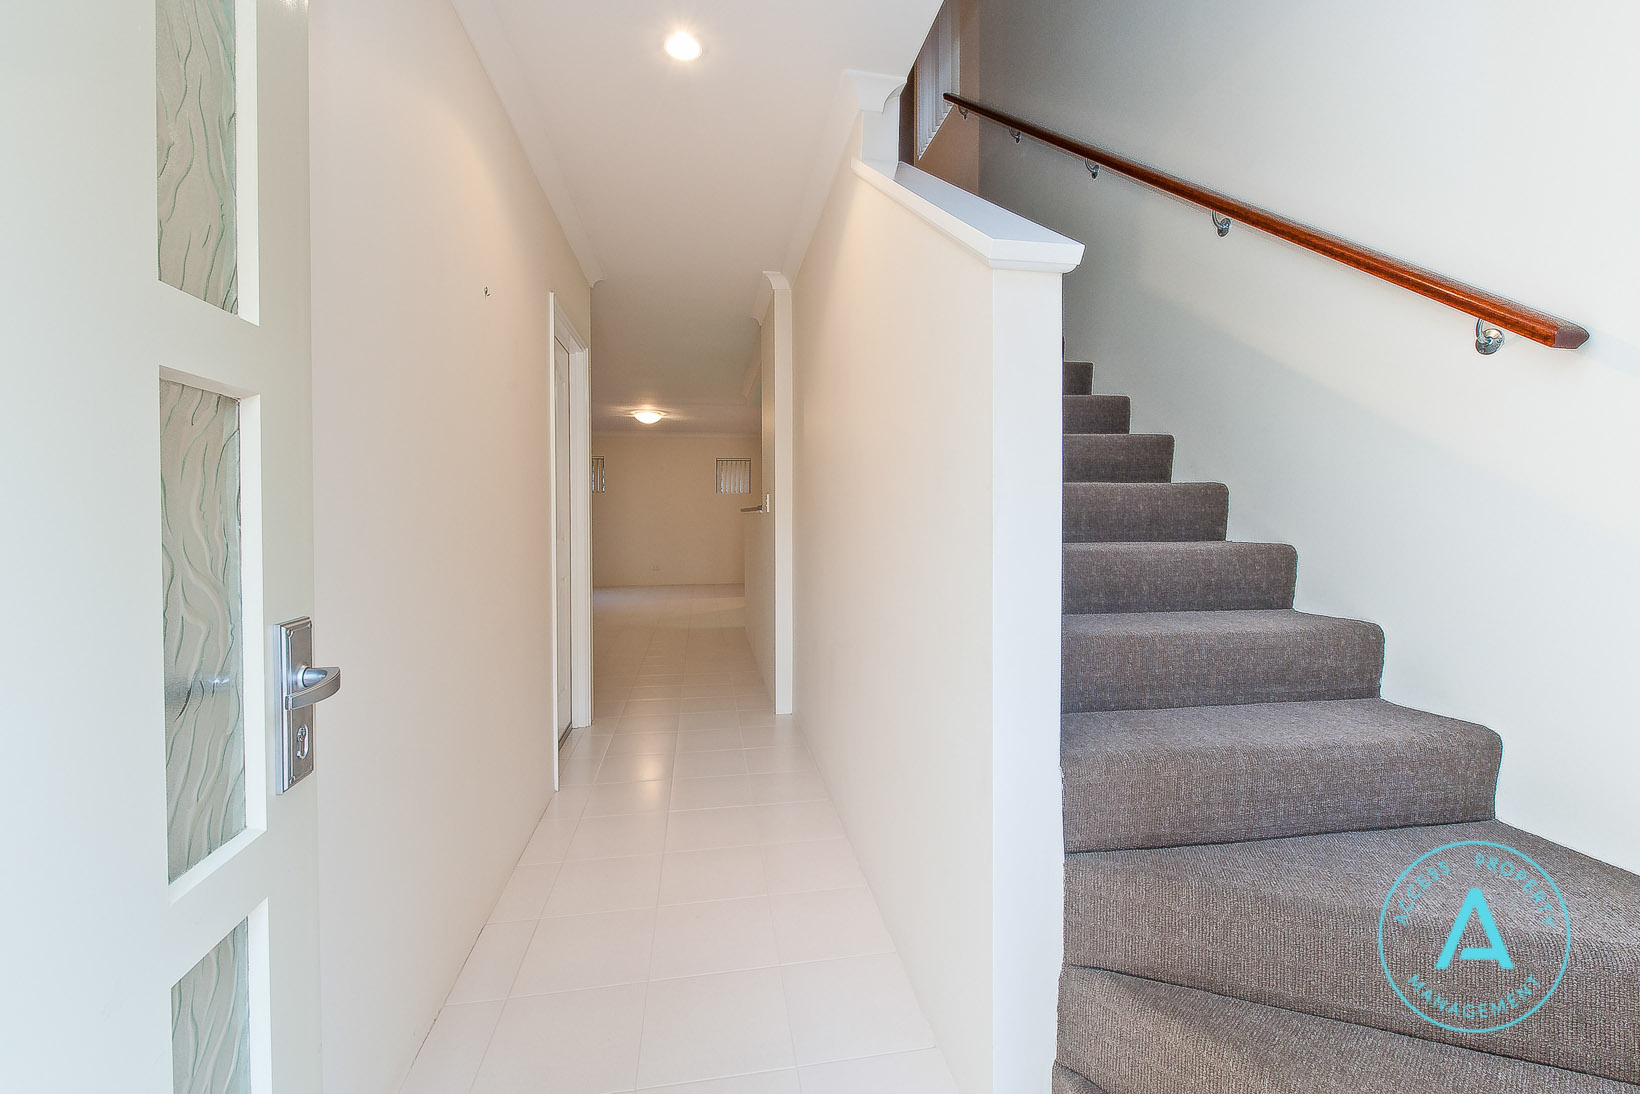 Access Property Management 7/8 Forster Avenue Stairs